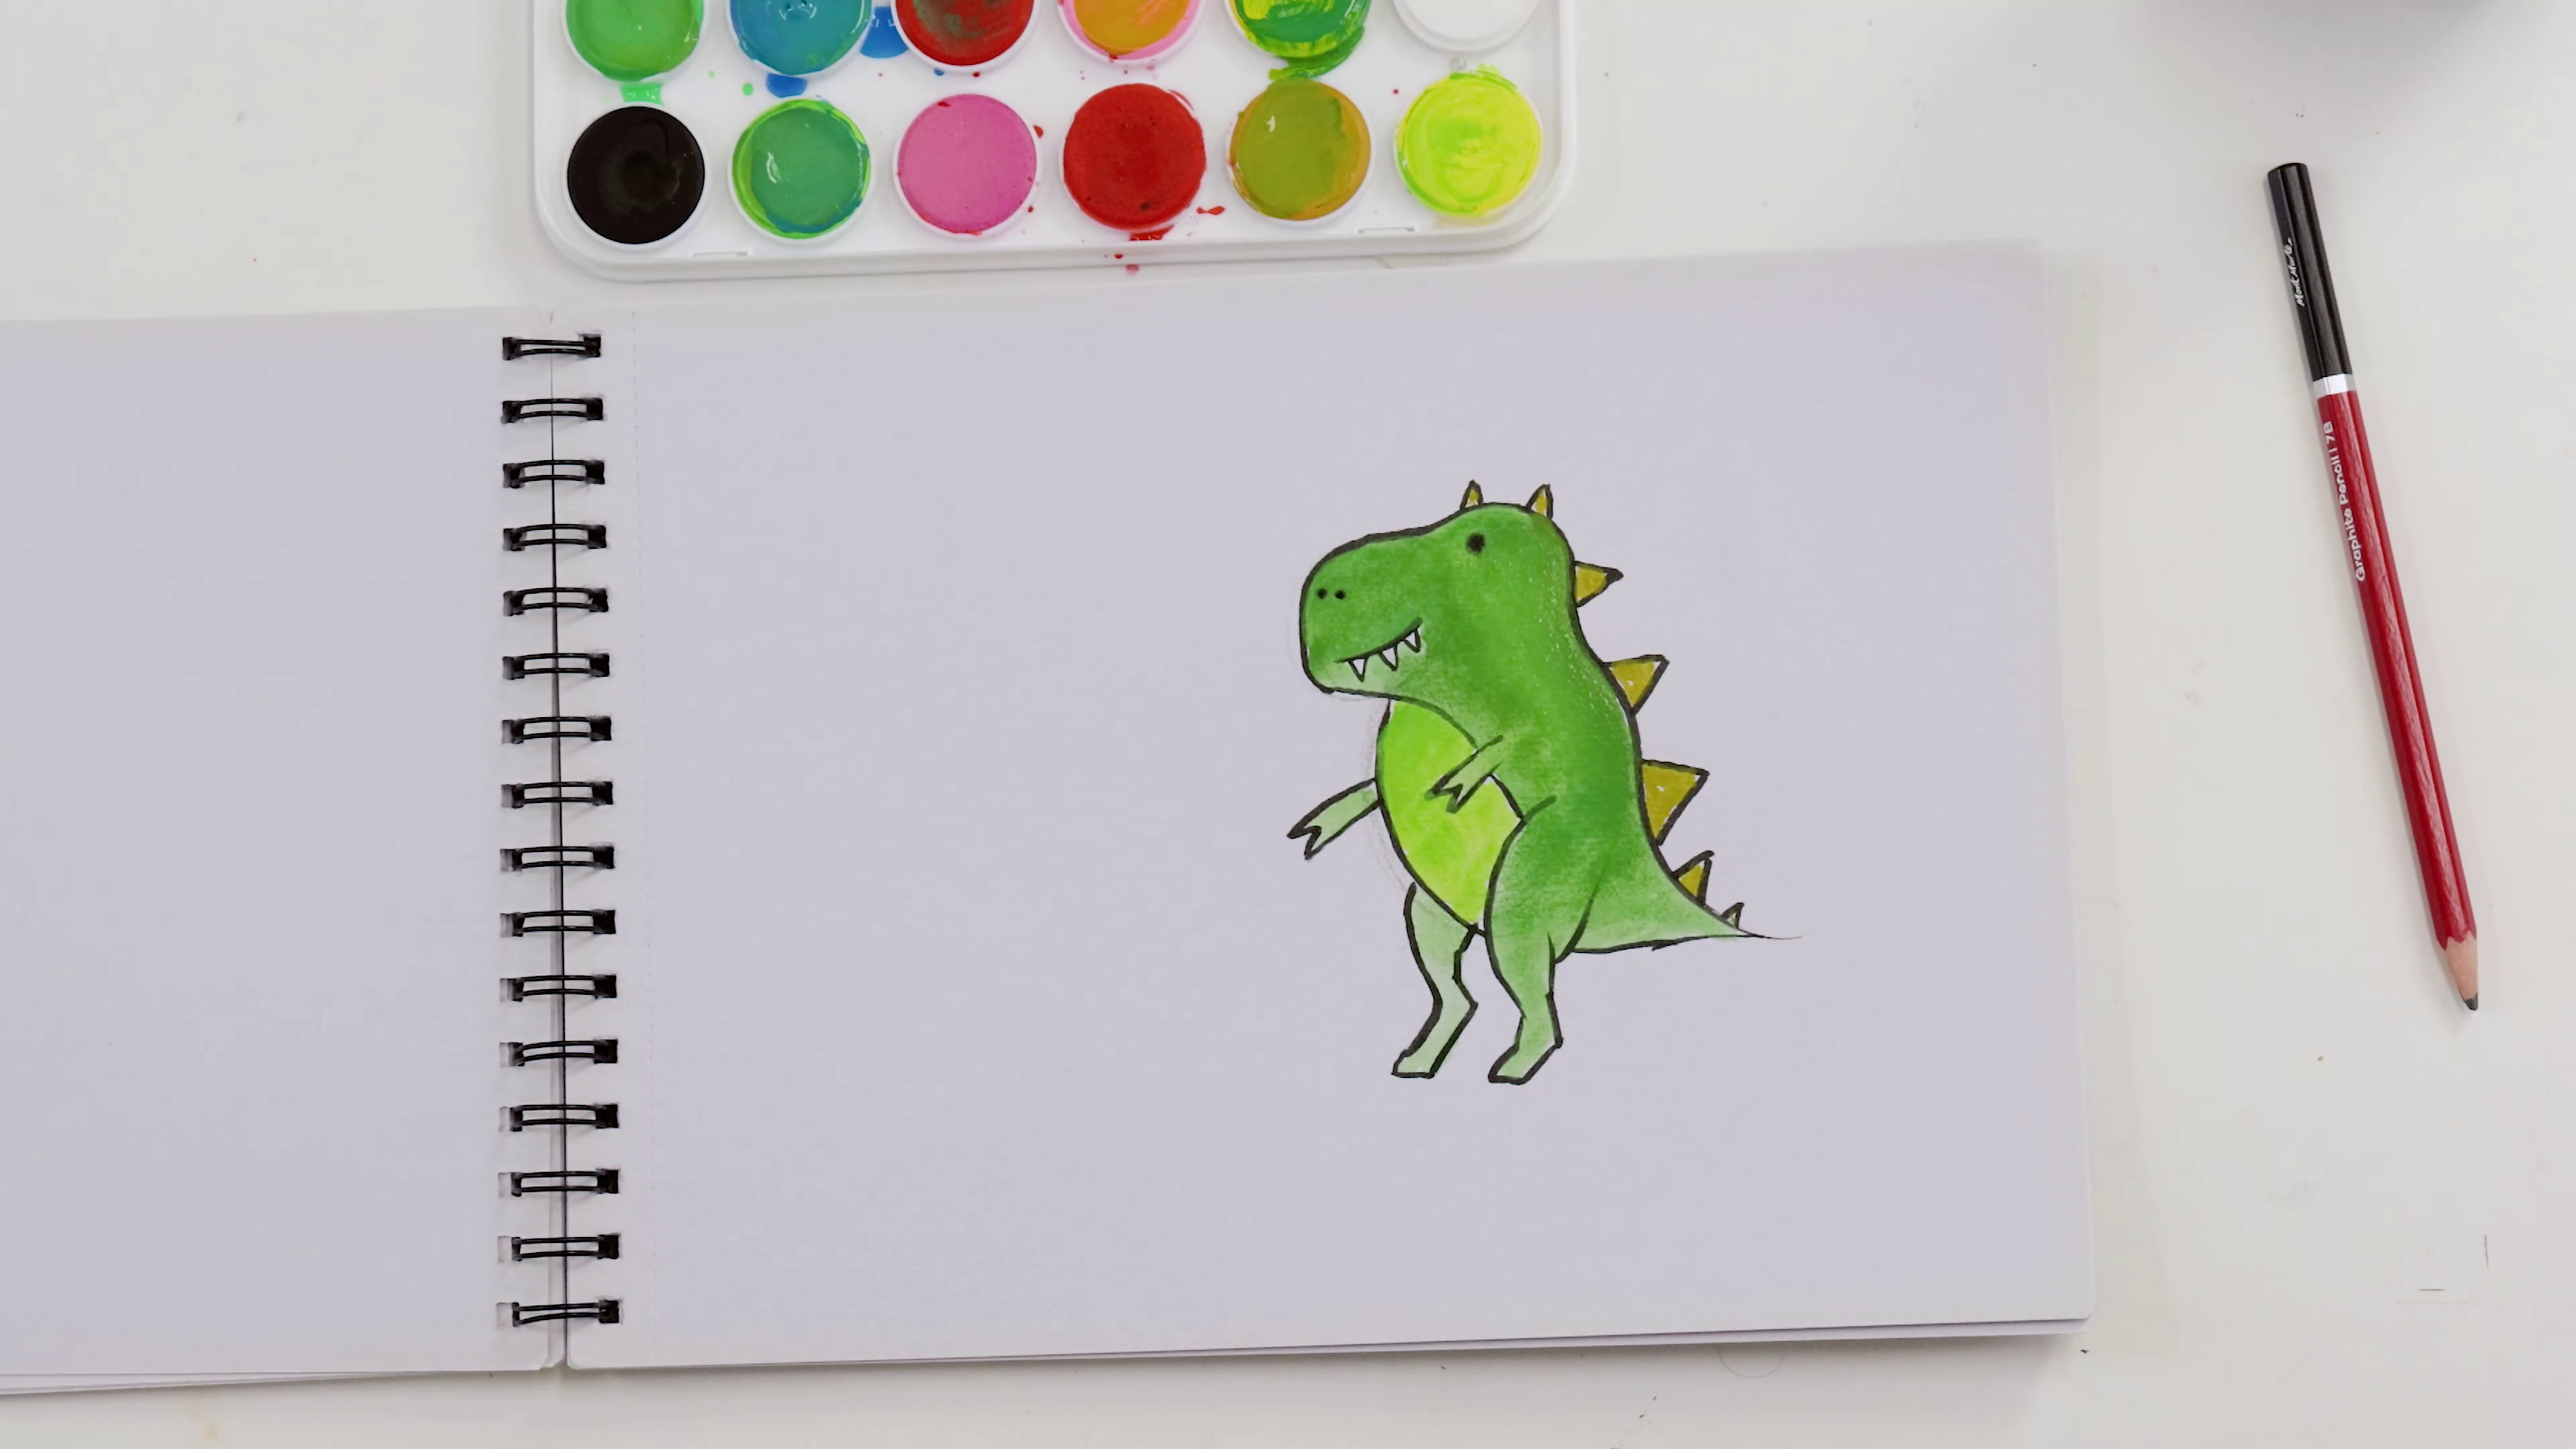 Green t-rex watercolour painting on sketchbook